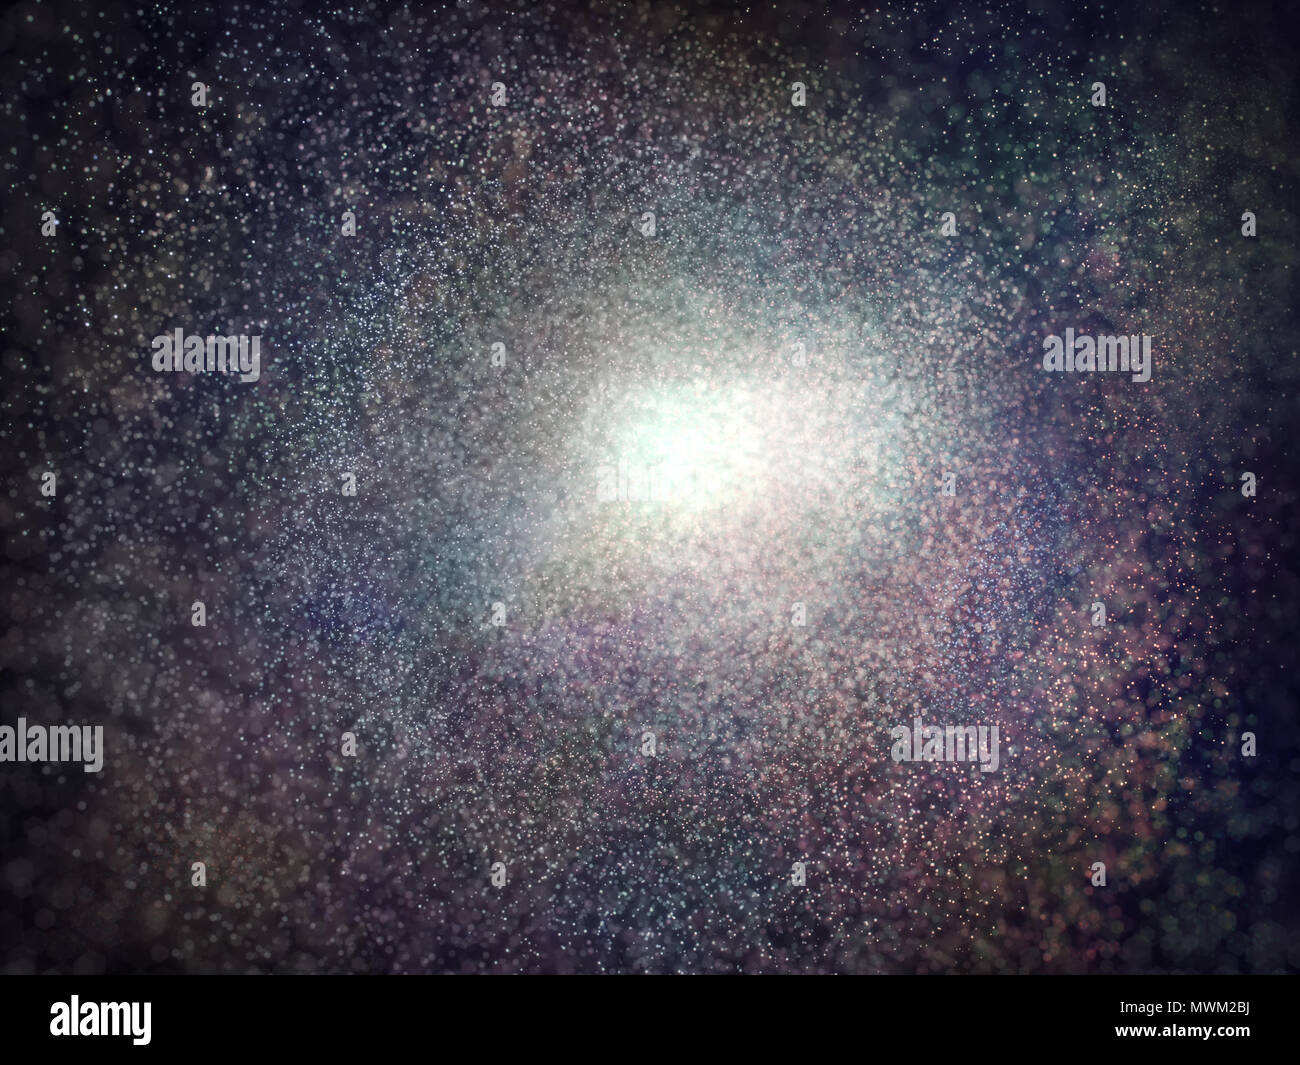 3D illustration. Abstract image of the universe with a giant galaxy in the center. Stock Photo